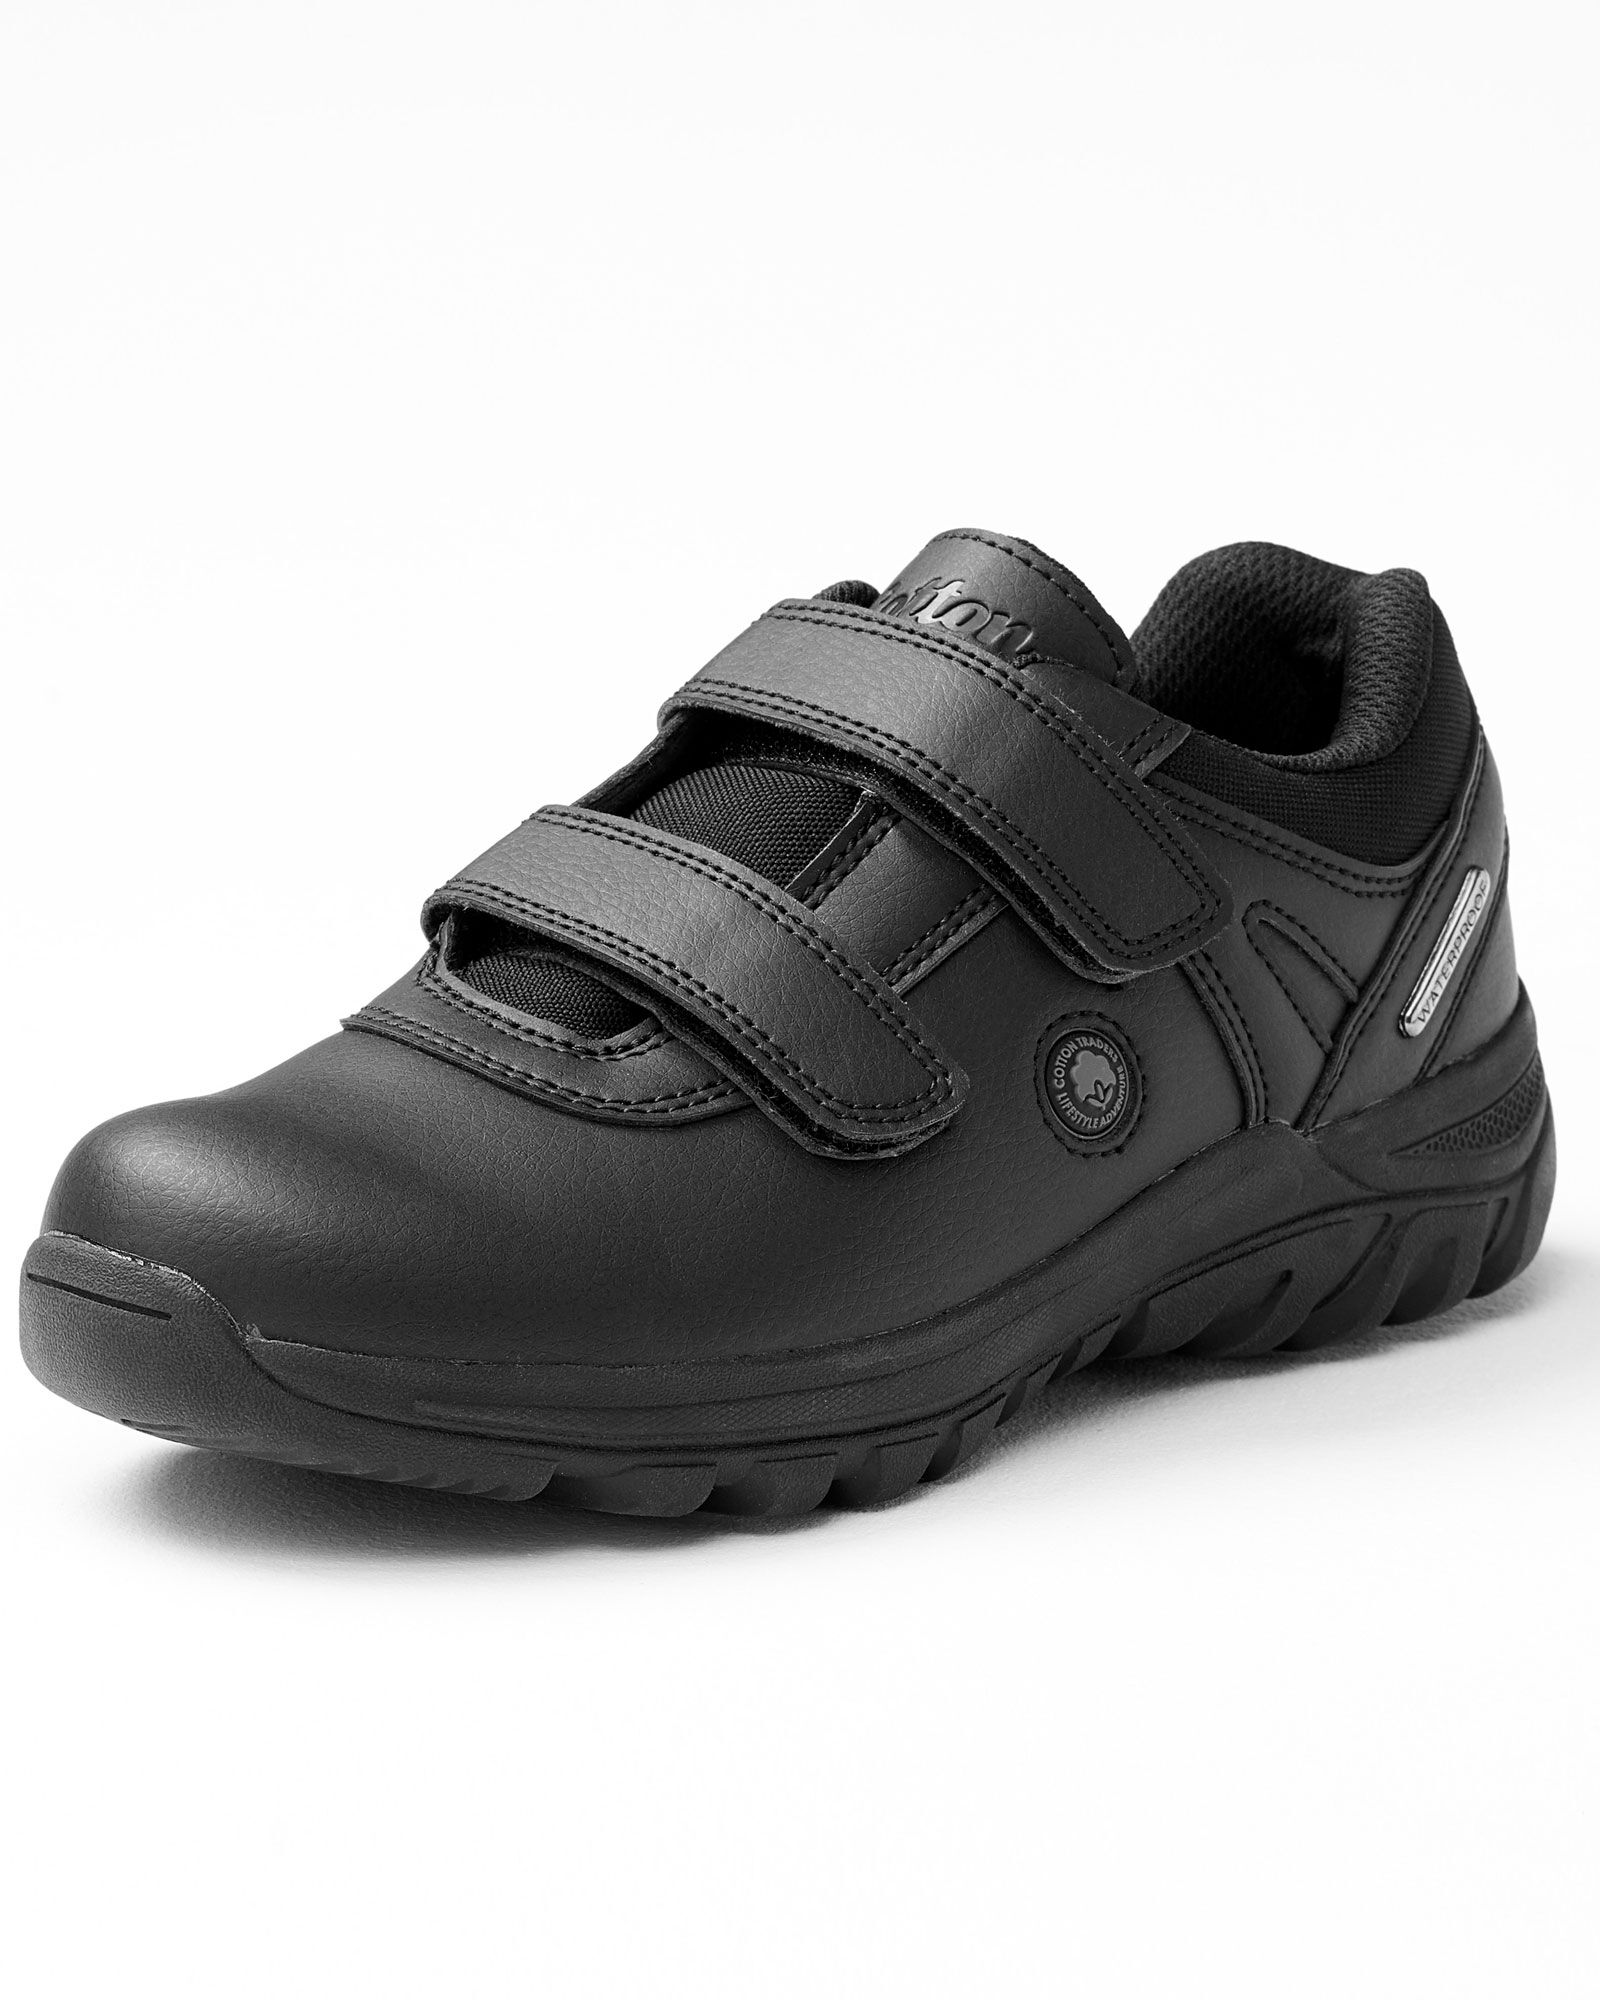 cotton traders mens shoes